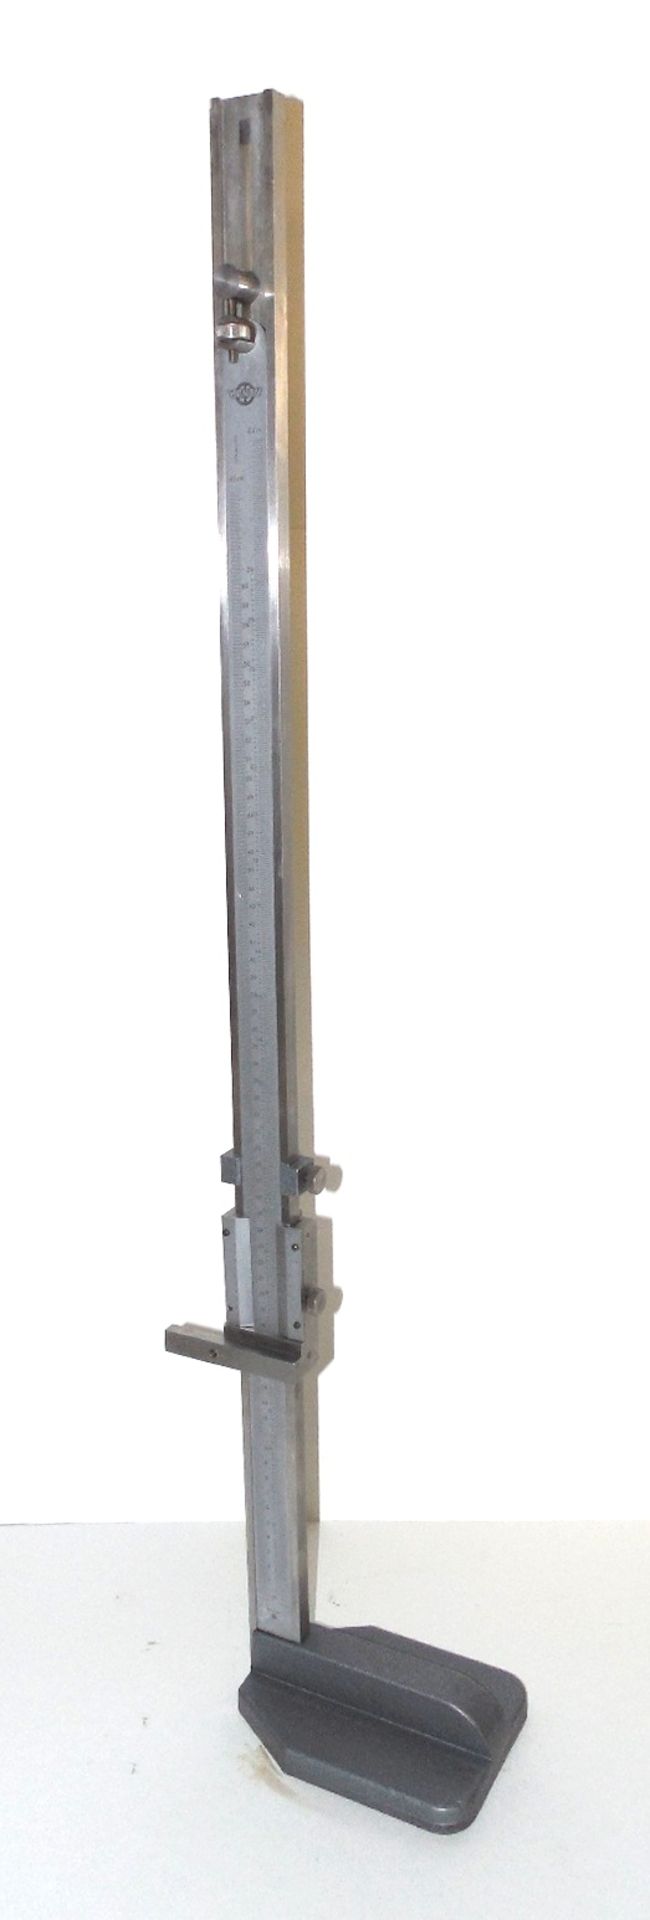 KANON 24" IN/MM HEIGHT GAGE